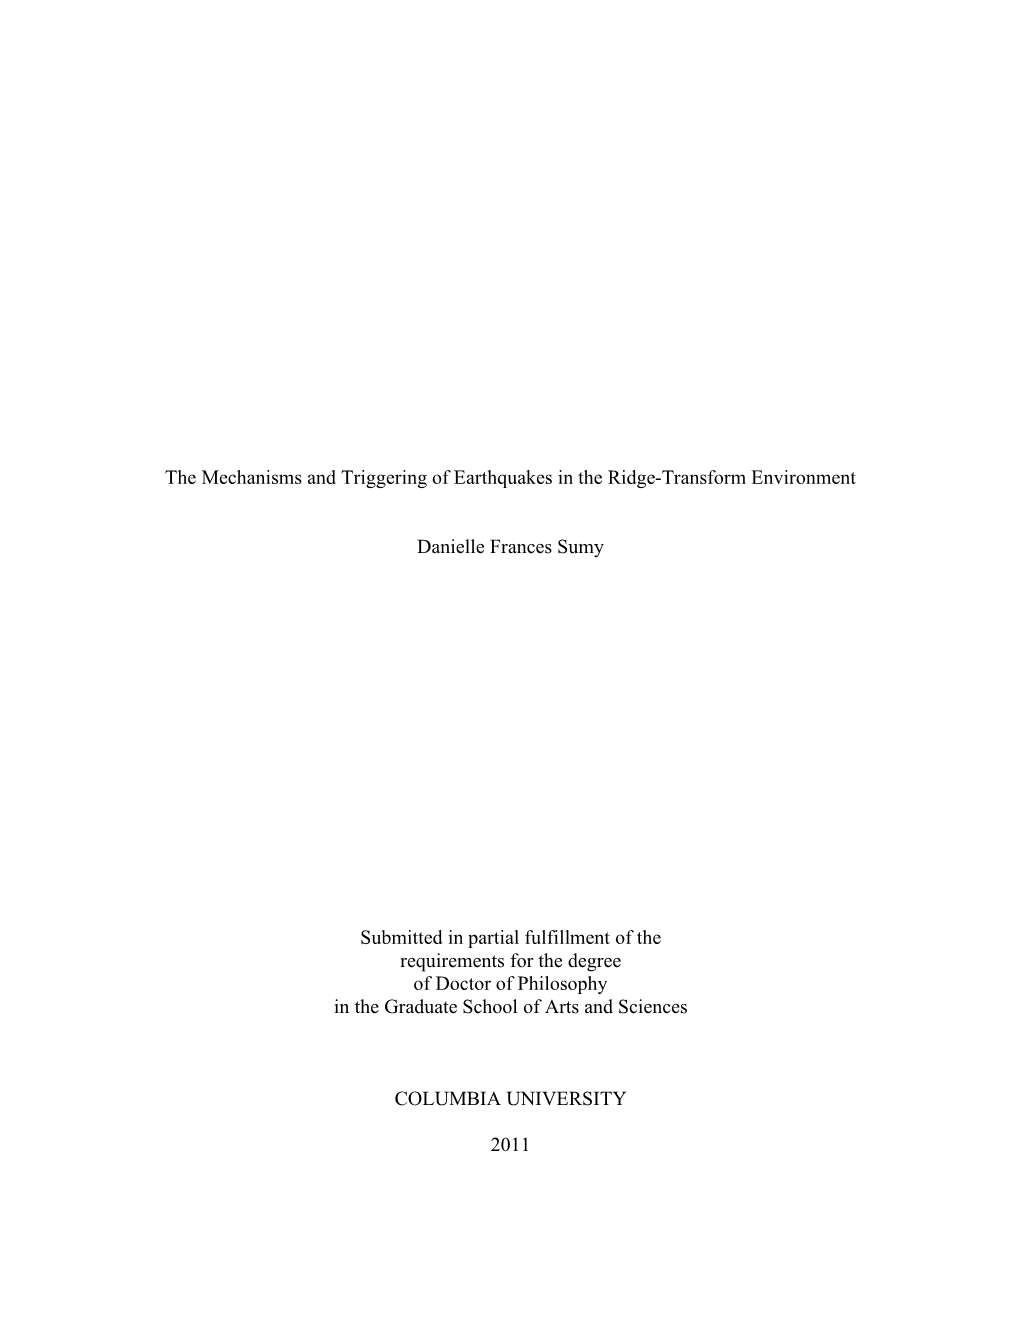 The Mechanisms and Triggering of Earthquakes in the Ridge-Transform Environment